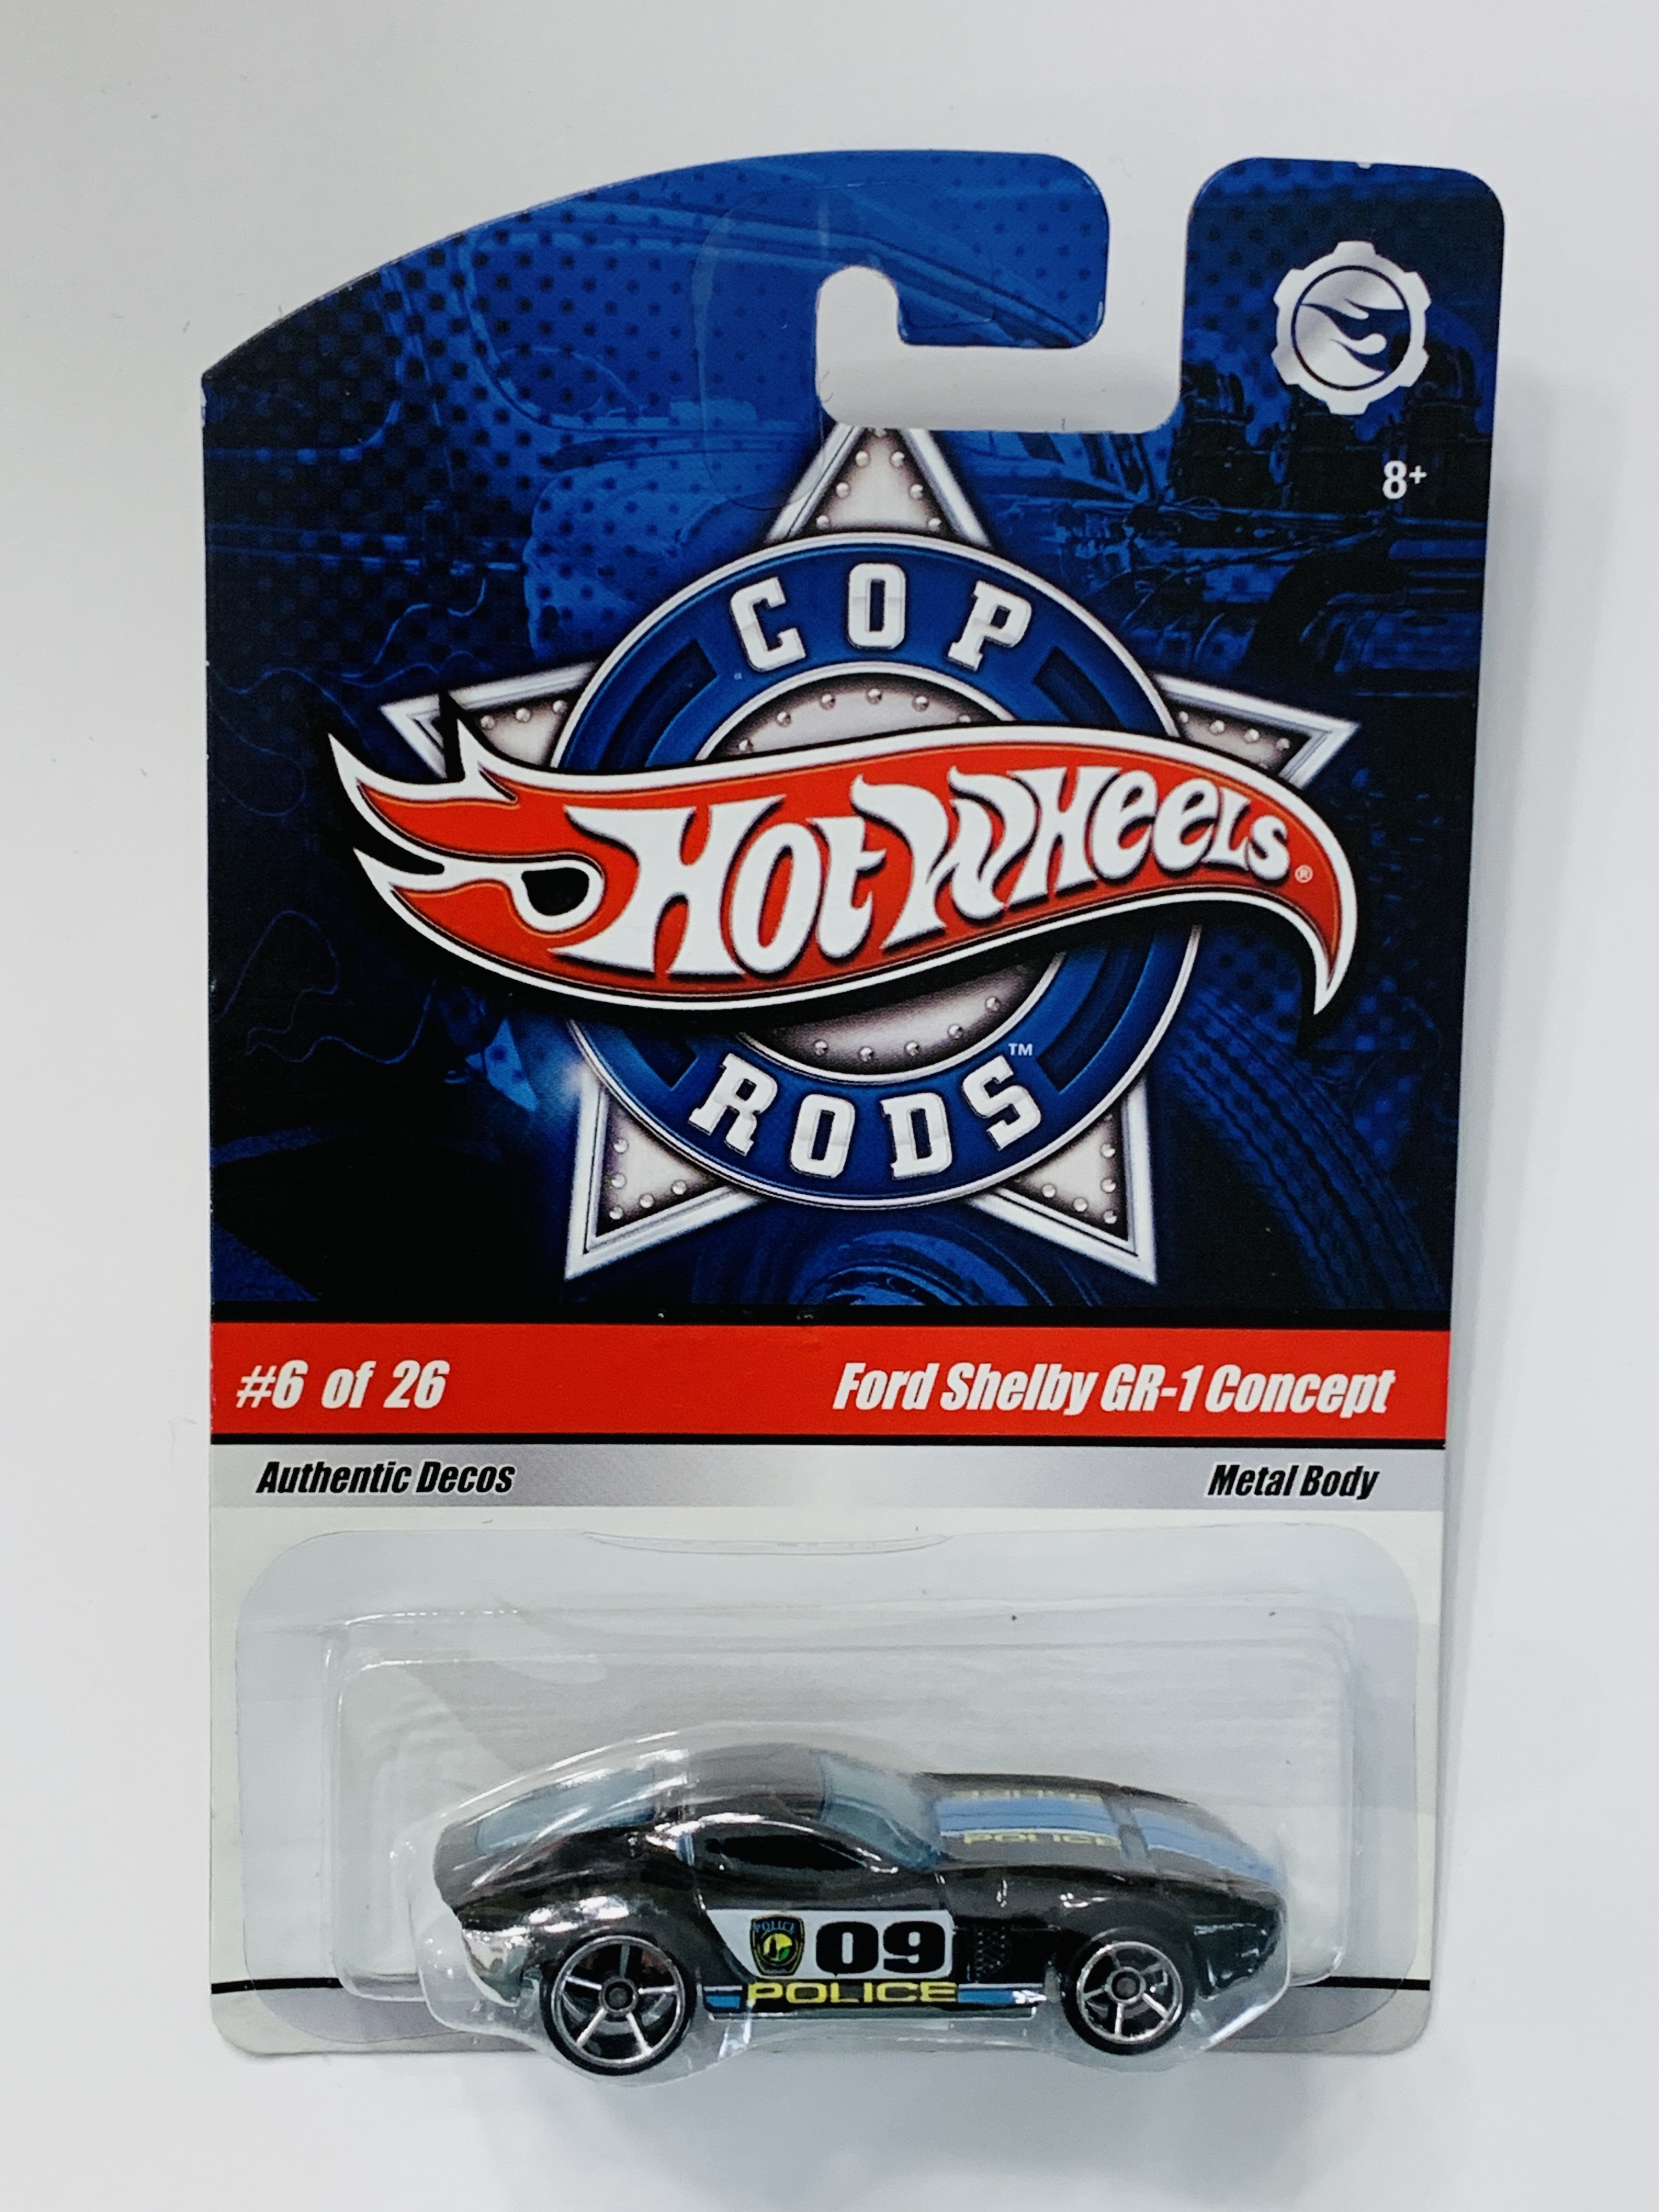 Hot Wheels Cop Rods Ford Shelby GR-1 Concept